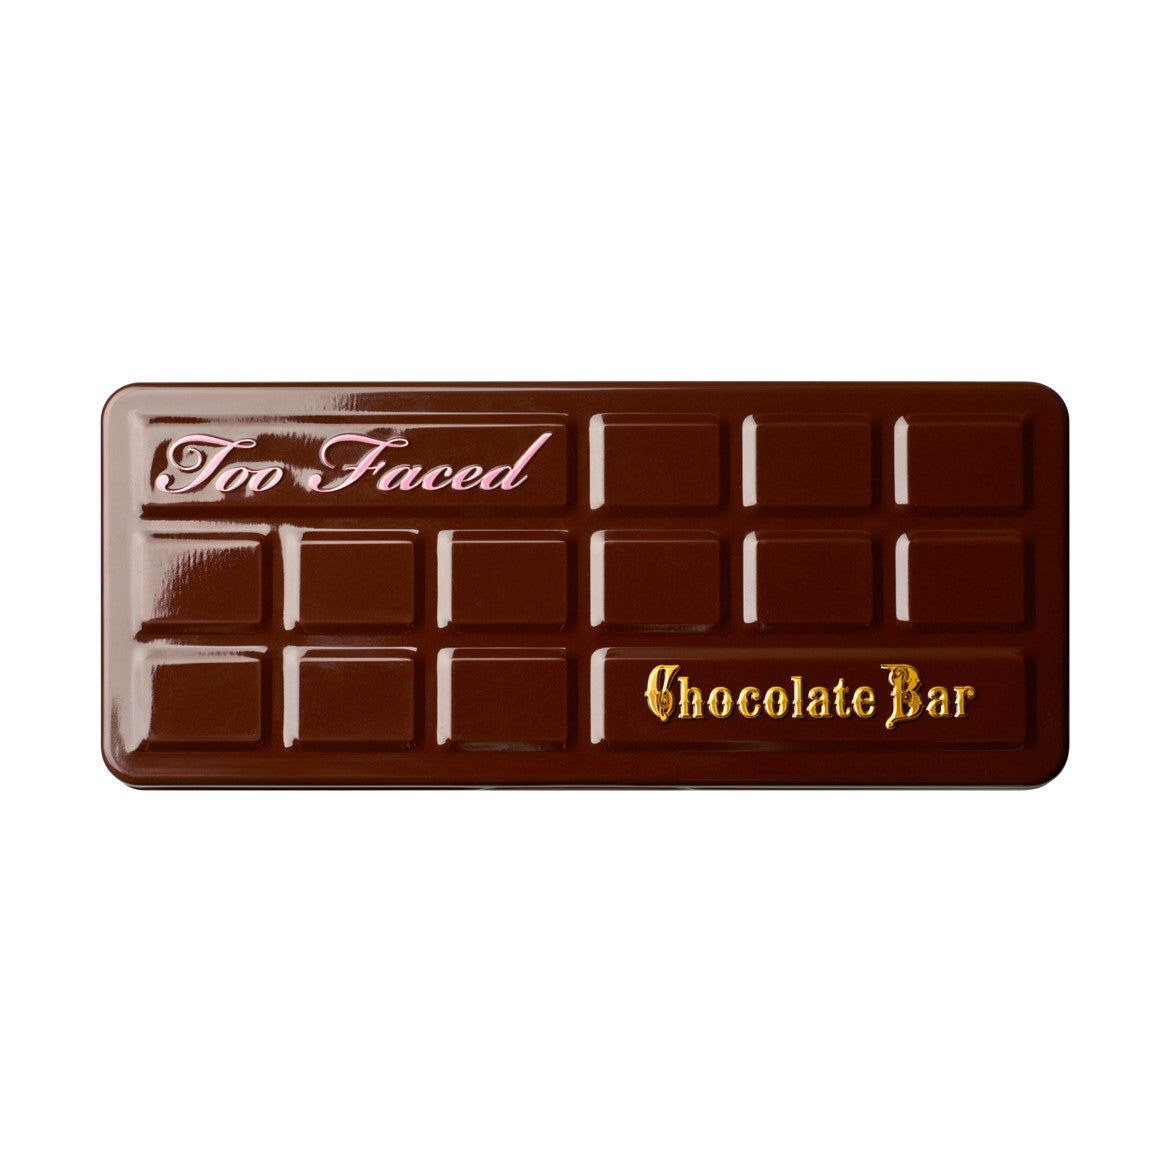 Too Faced - Chocolate Bar Eyeshadow Colection